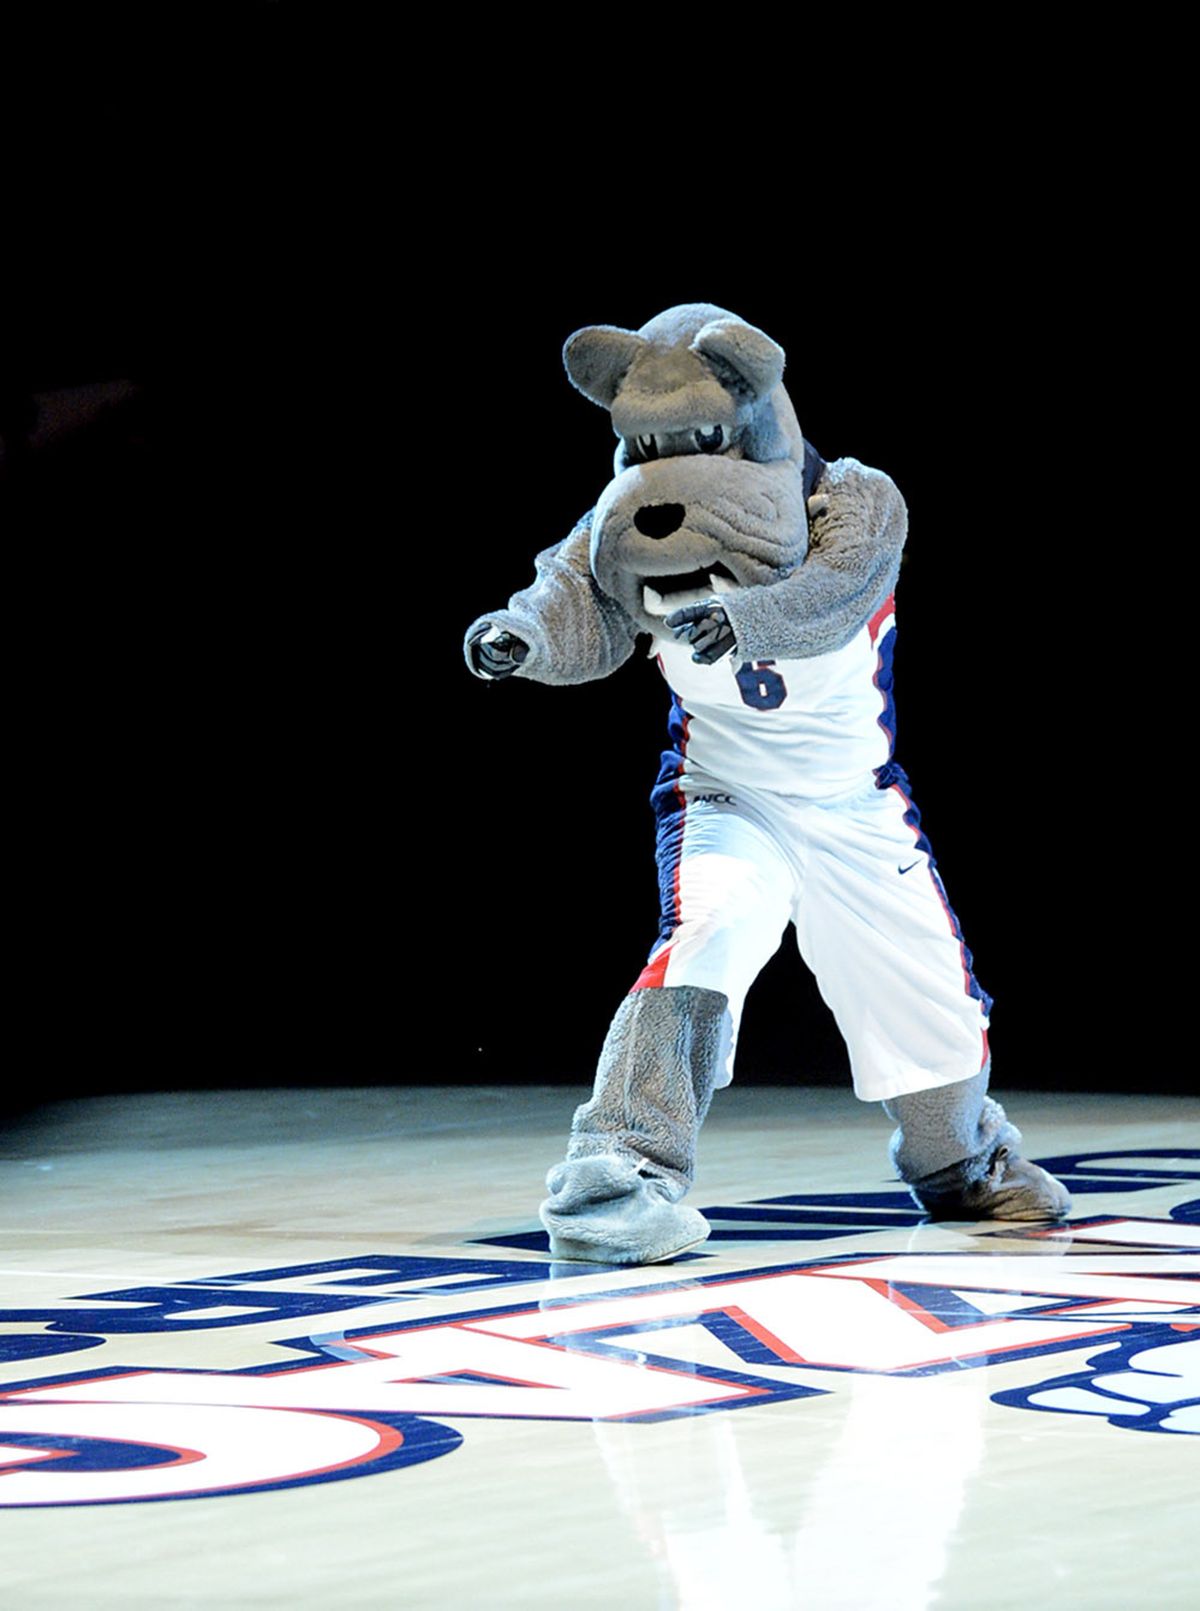 Spike, Gonzaga University’s mascot, helps introduce the players at the start of a women’s basketball game against Saint Mary’s on Feb. 14, 2013, in the McCarthey Athletic Center. (FILE)